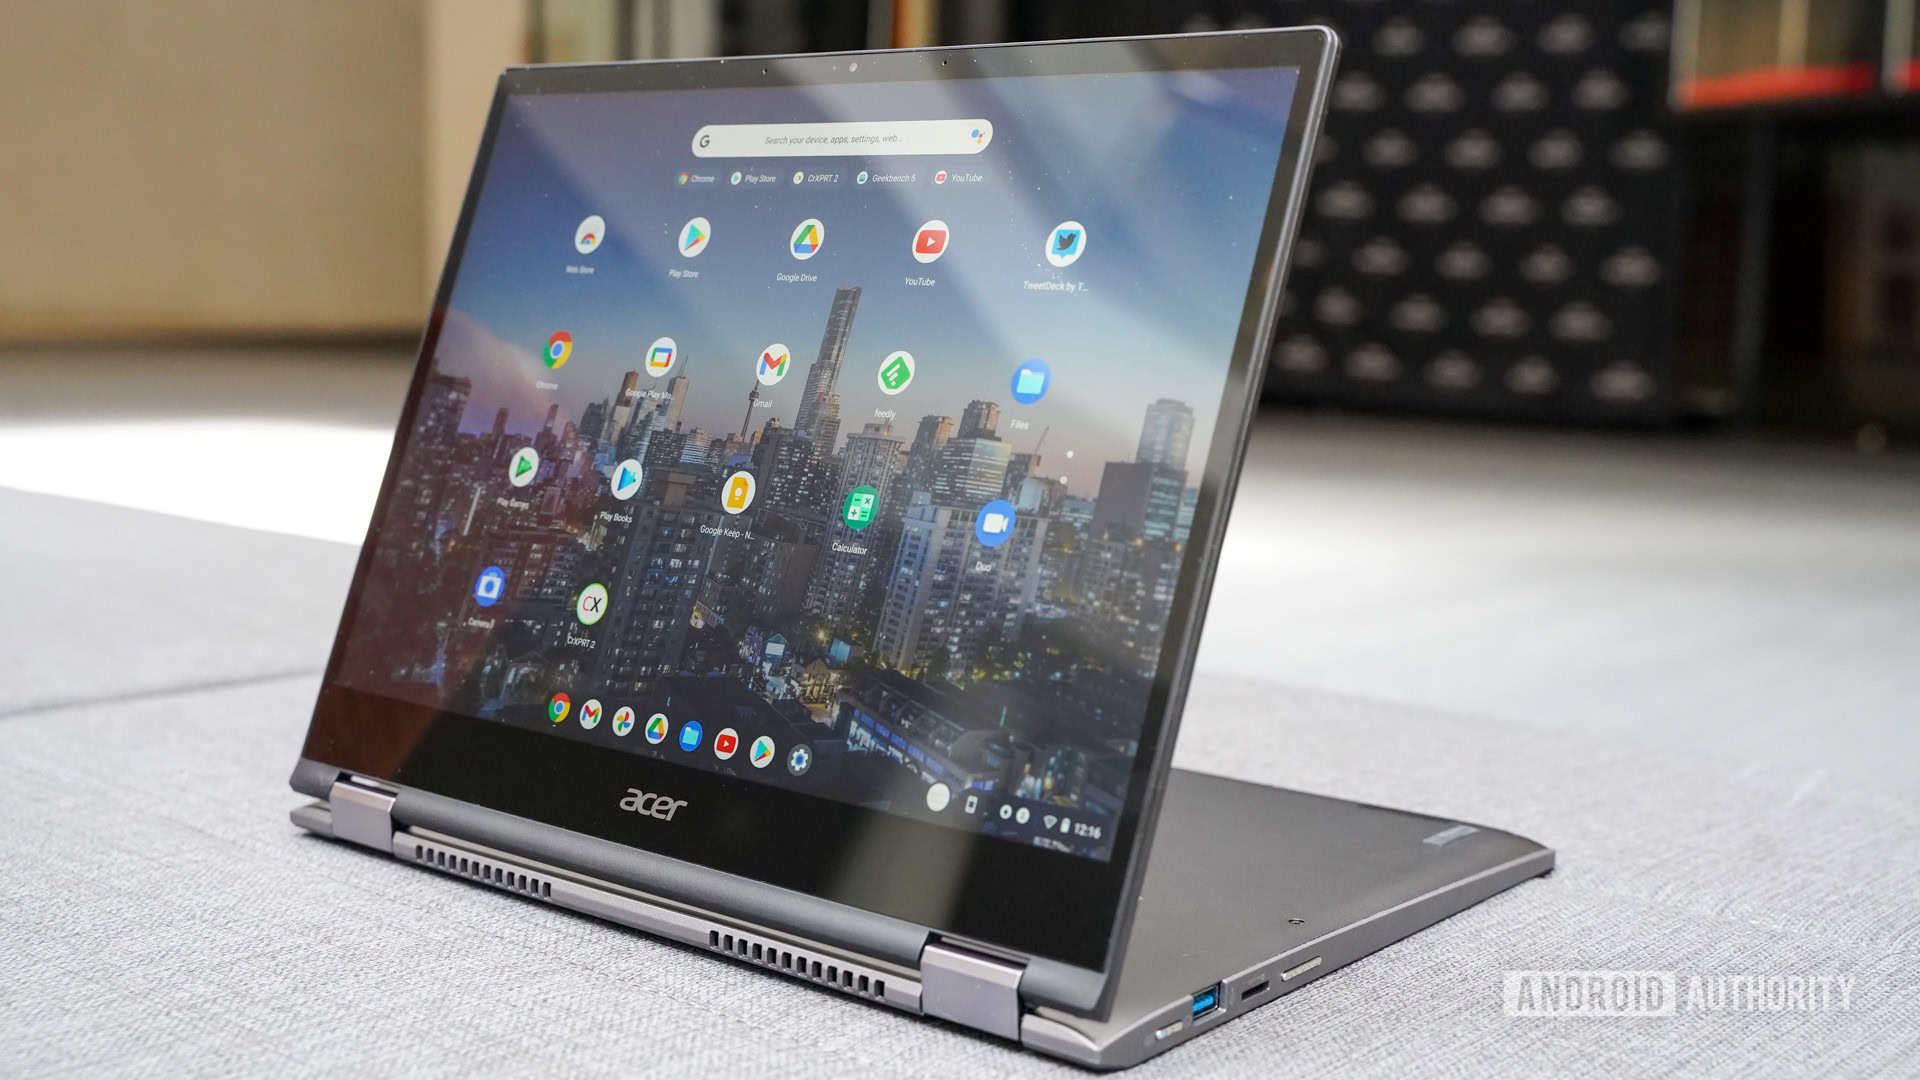 How to connect a Chromebook to a TV